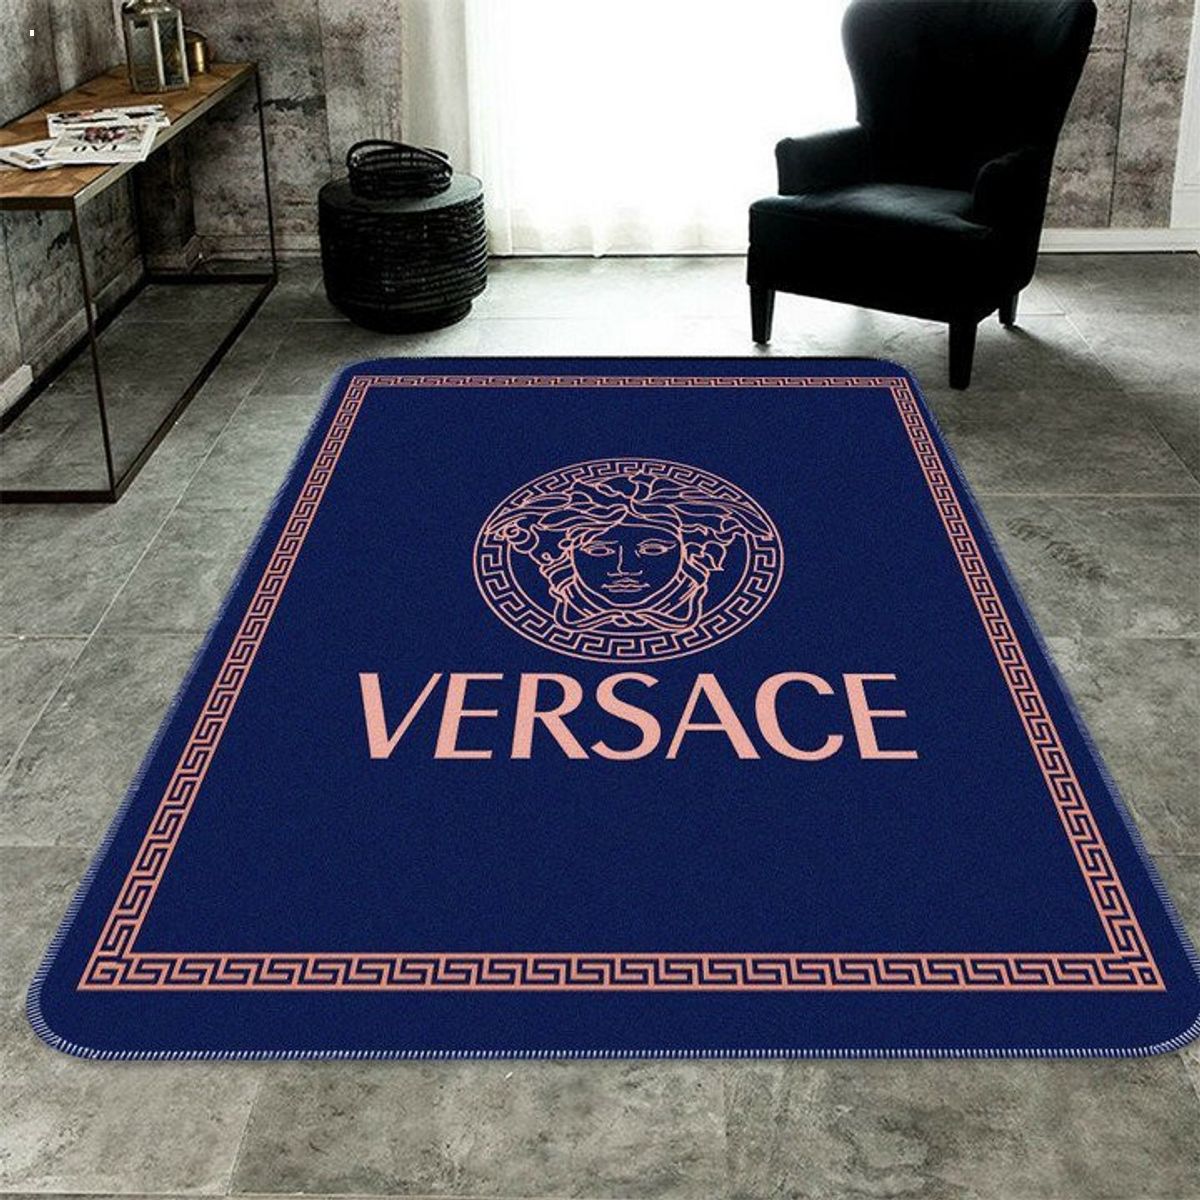 Versace Blue Luxury Brand Carpet Rug Limited Edition